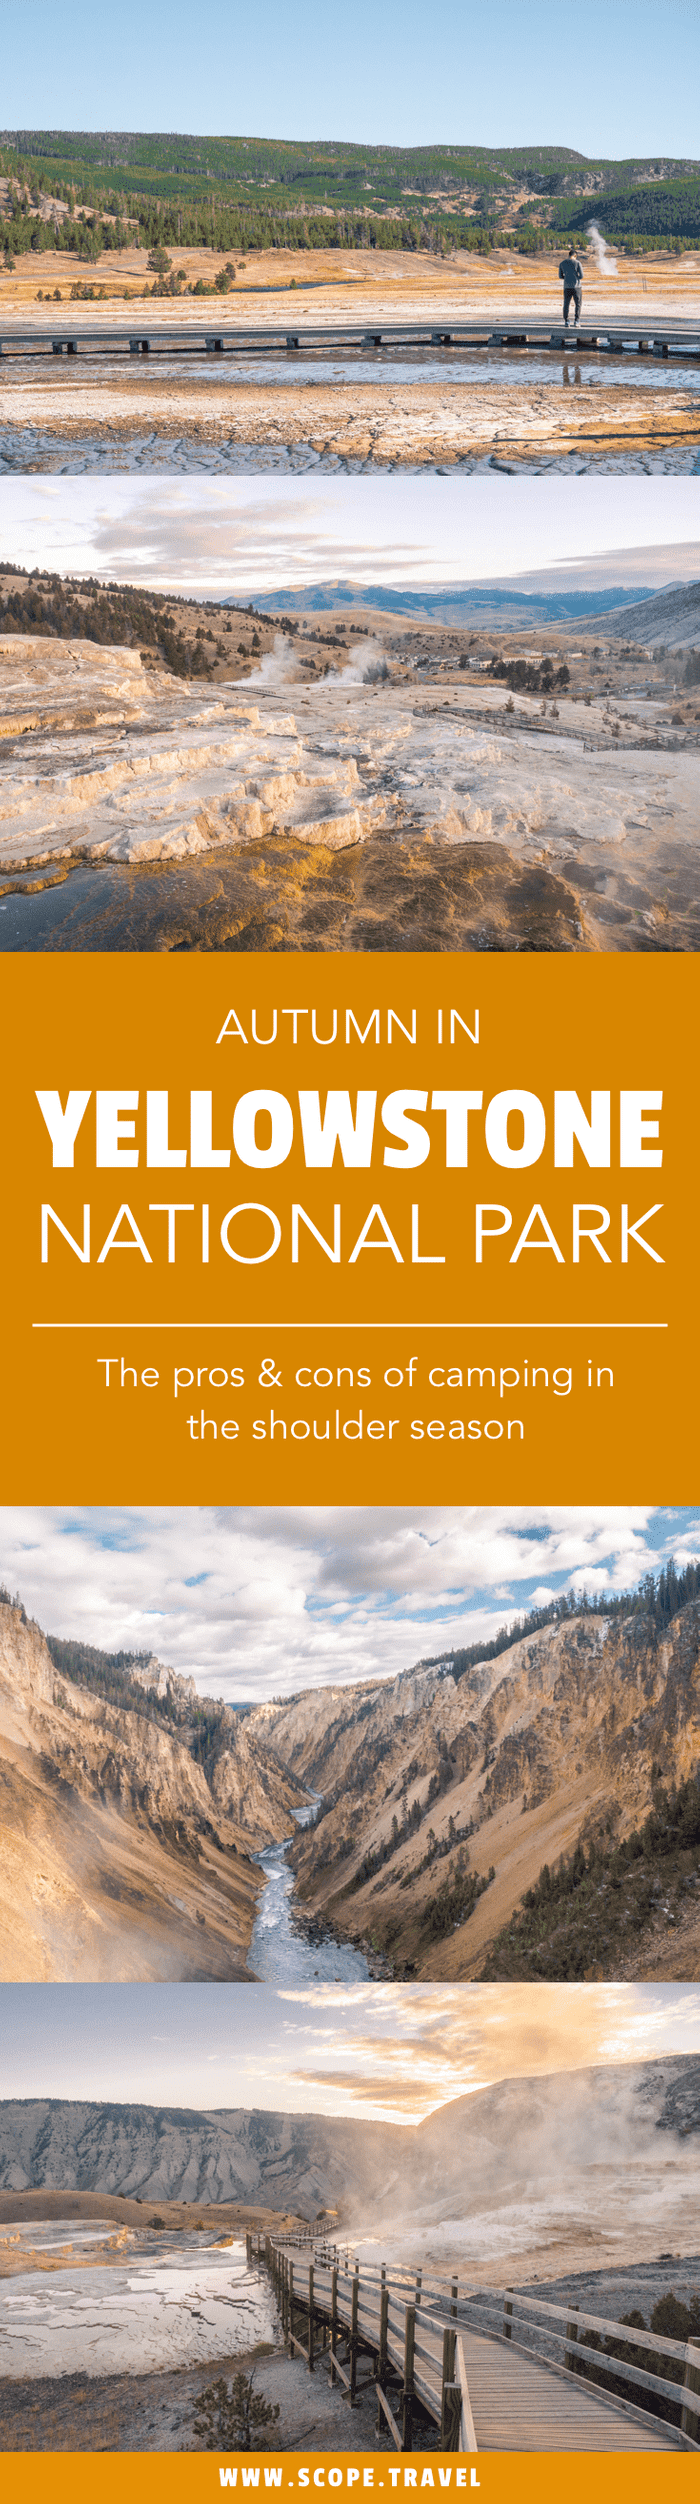 Pinterest Yellowstone in the fall